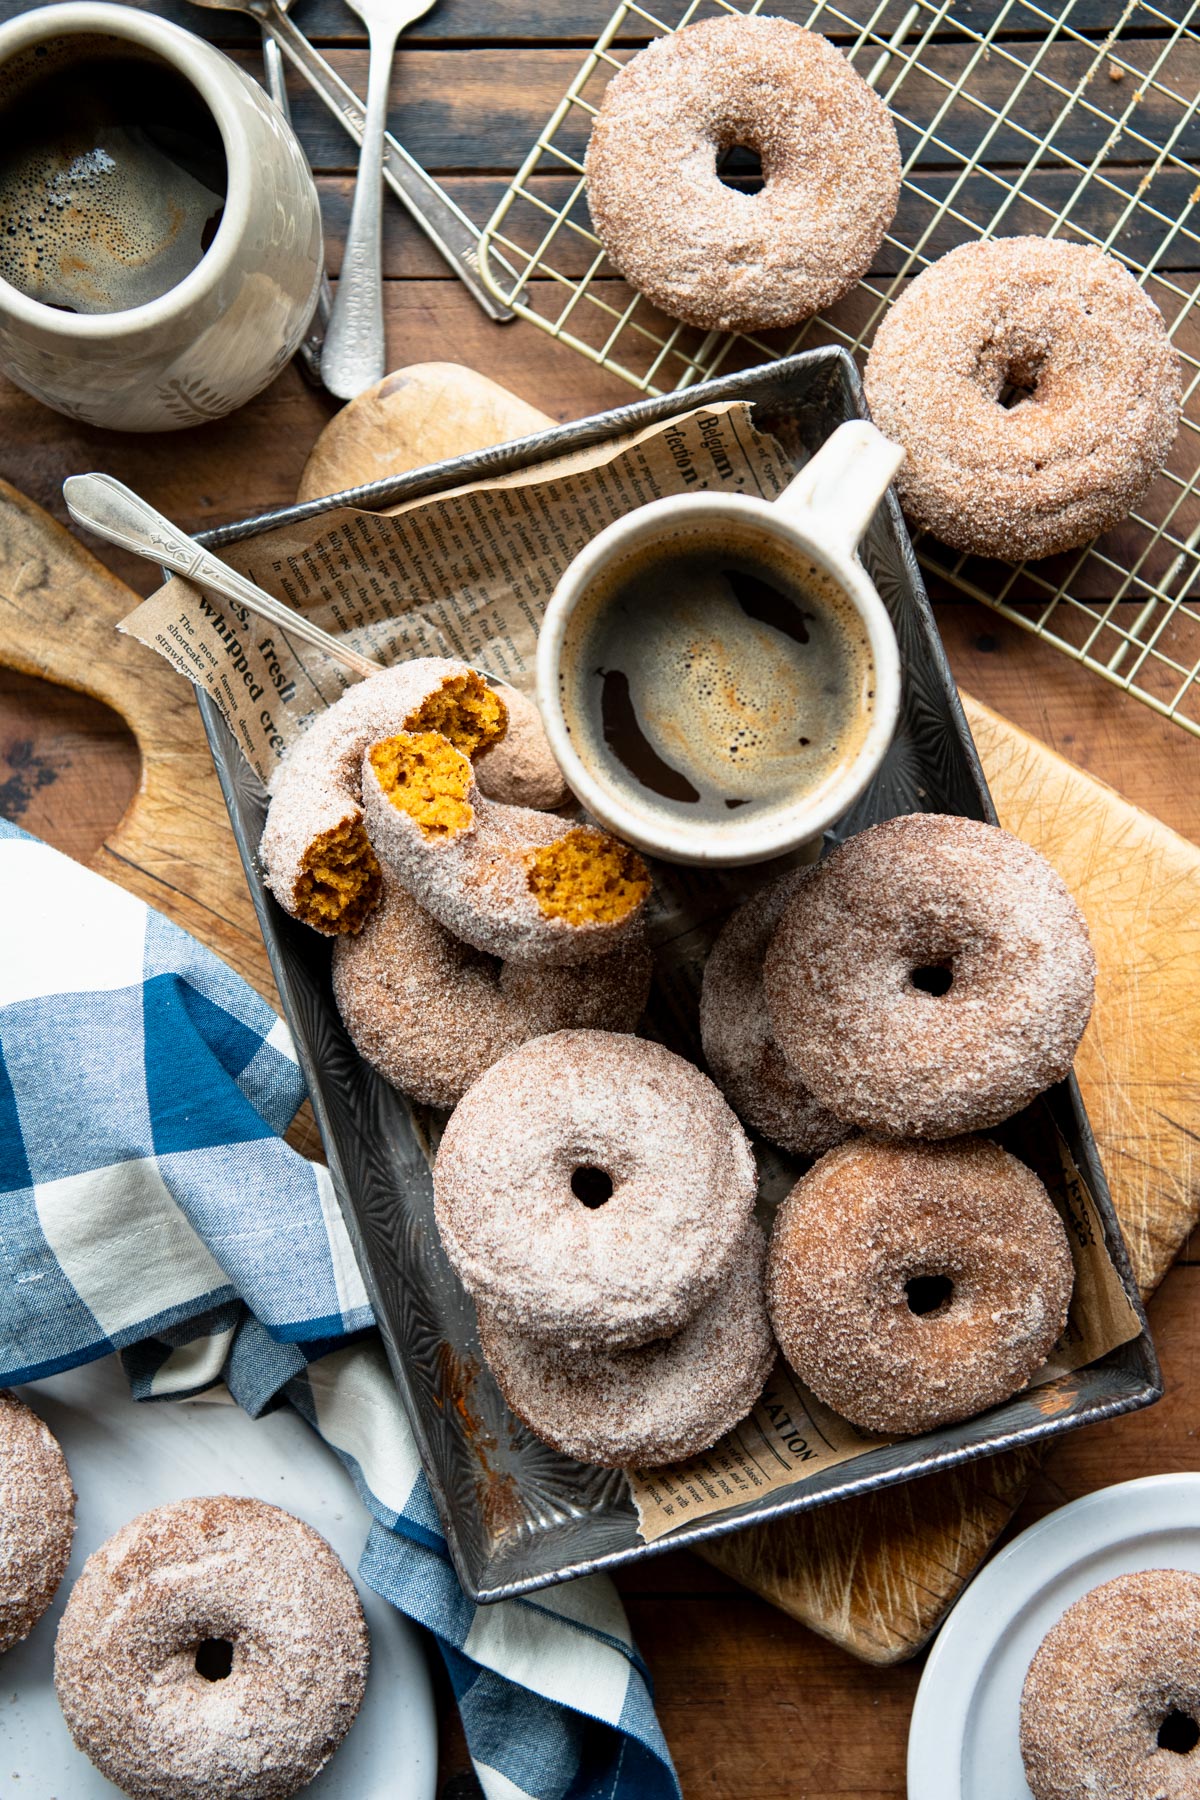 Wooden table full of a tray of pumpkin doughnuts with a blue and white check napkin nearby.